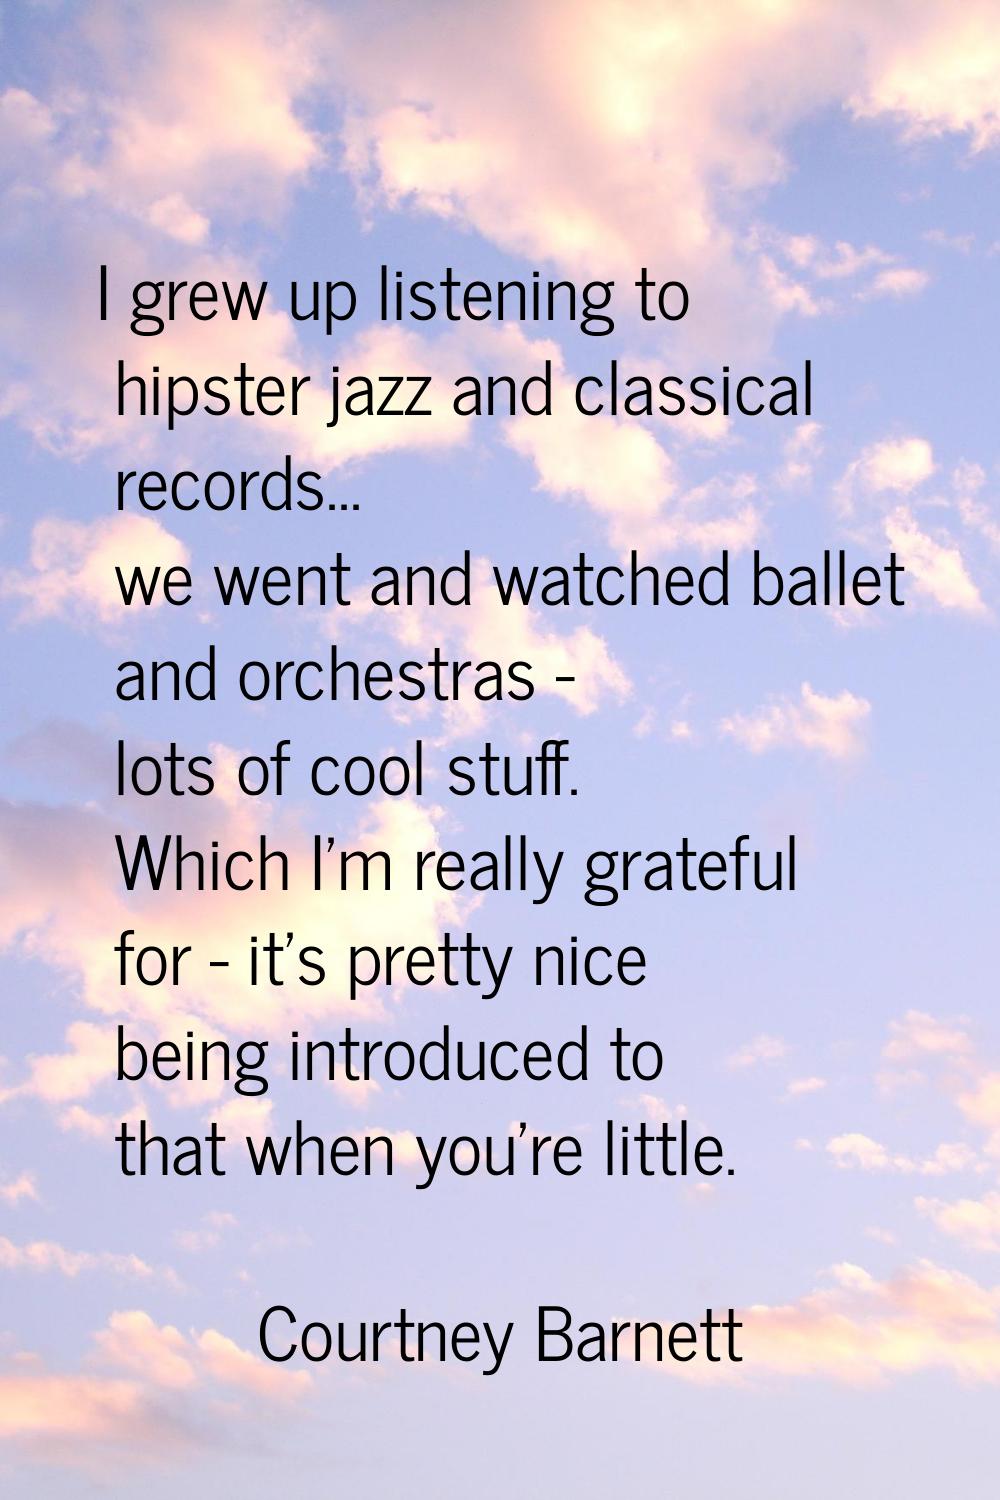 I grew up listening to hipster jazz and classical records... we went and watched ballet and orchest